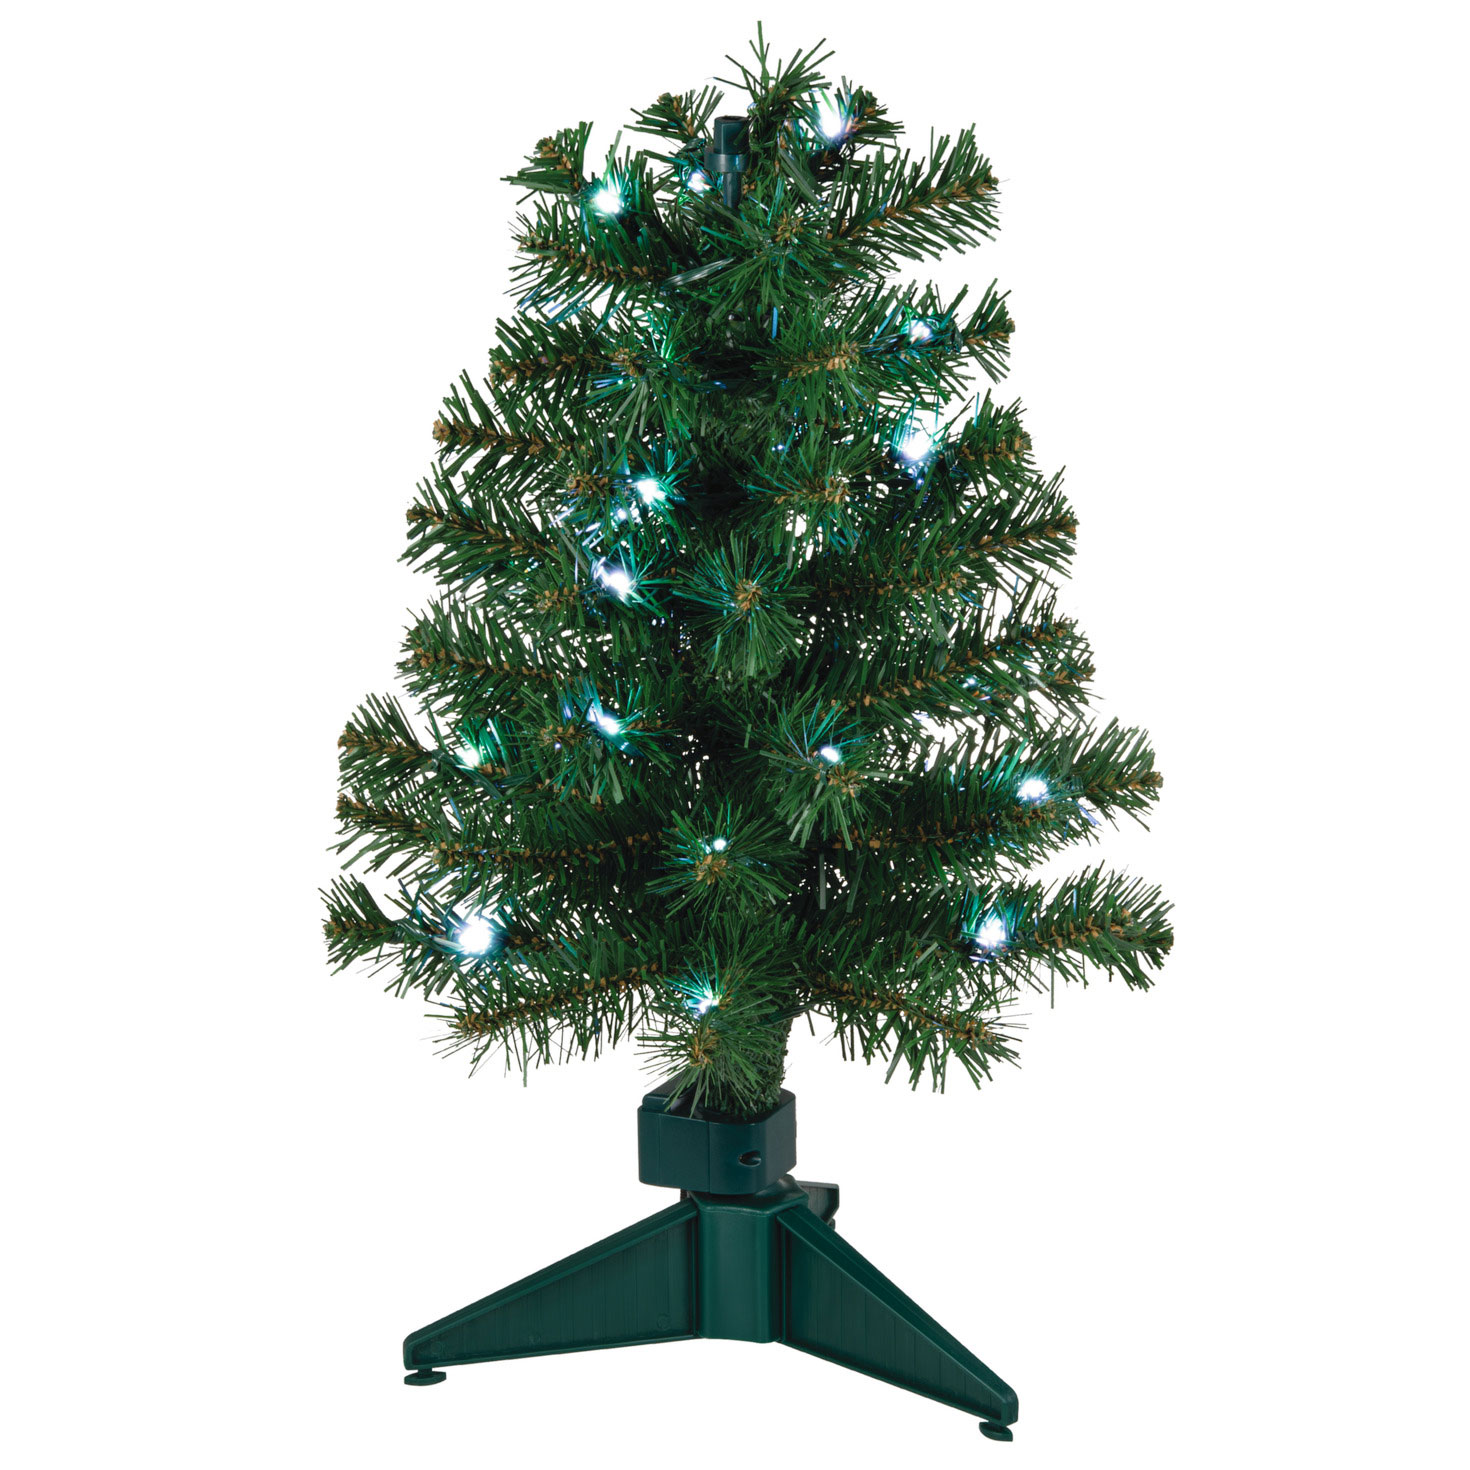 Mini ShowToppers Evergreen Christmas Tree With Light, 17